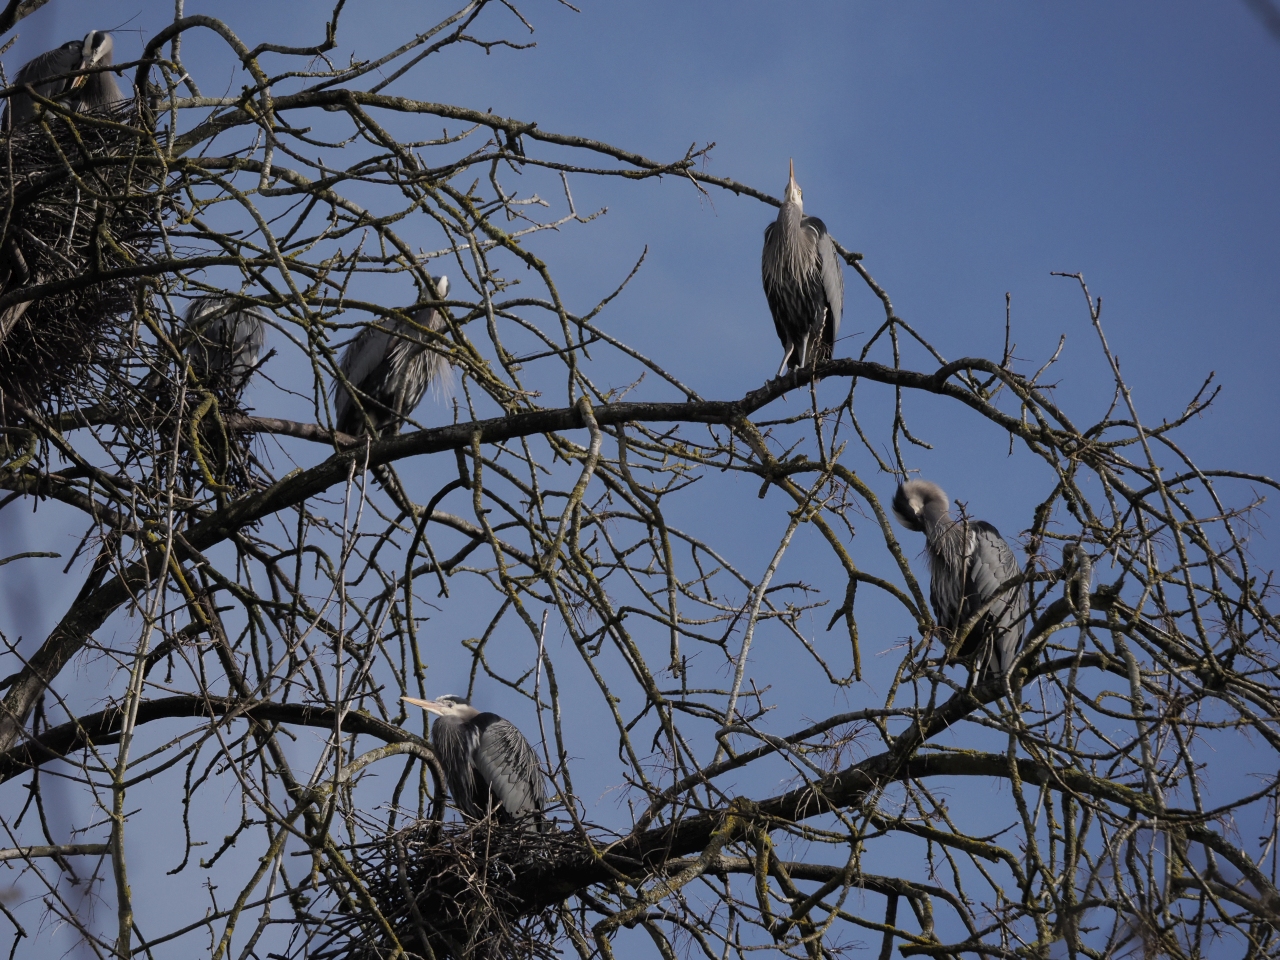 Promises also include my impressions of yet another Olympus Test & Wow, this time trying out their latest flagship mirrorless camera. This image, chosen at random, only shows a few of the herons nesting next to the Kenmore Park & Ride...